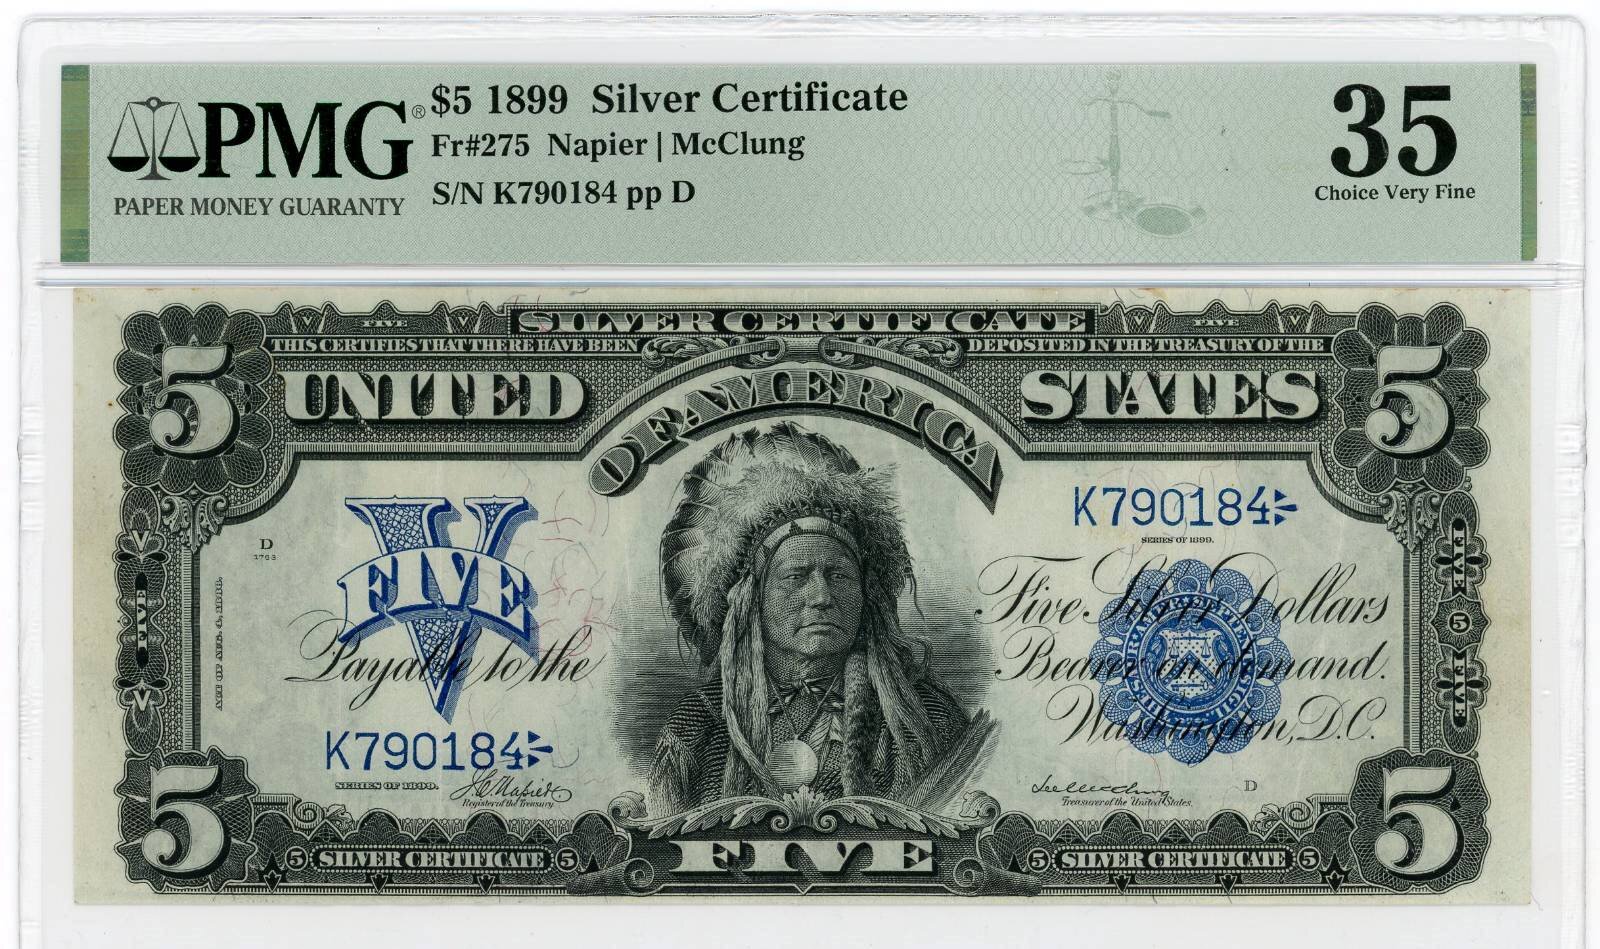 Featured item from our U.S. Graded Currency Sale! 

US Fr 275 1899 Blue Silver Certificate PMG 35

Auction ends: Monday, December 4th at 6:52pm EST

Visit the 'Current Sales' link in our profile to view the catalogue and bid!